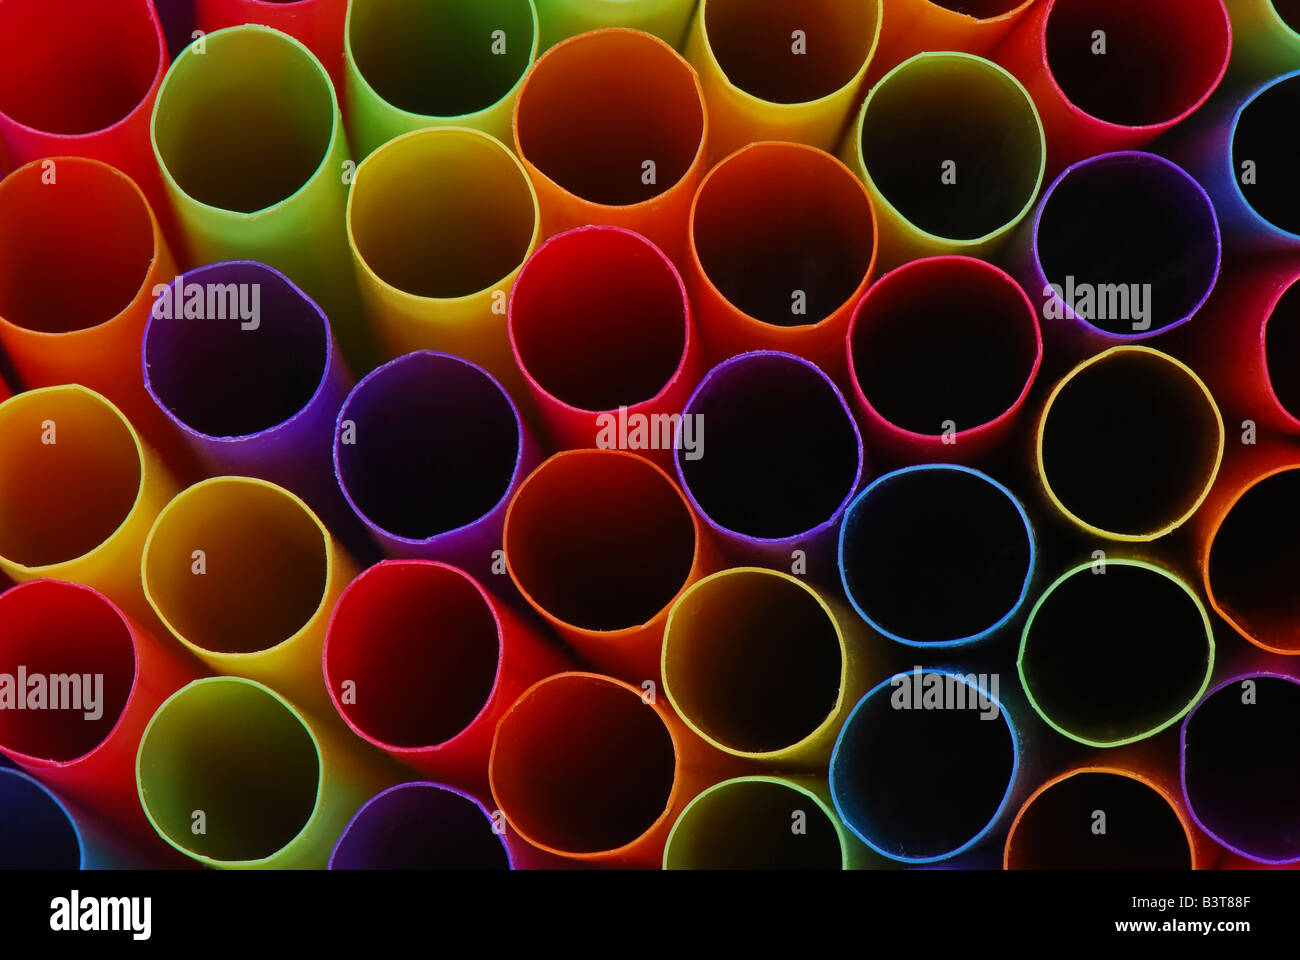 Abstract of ends of multicolored drinking straws. Stock Photo